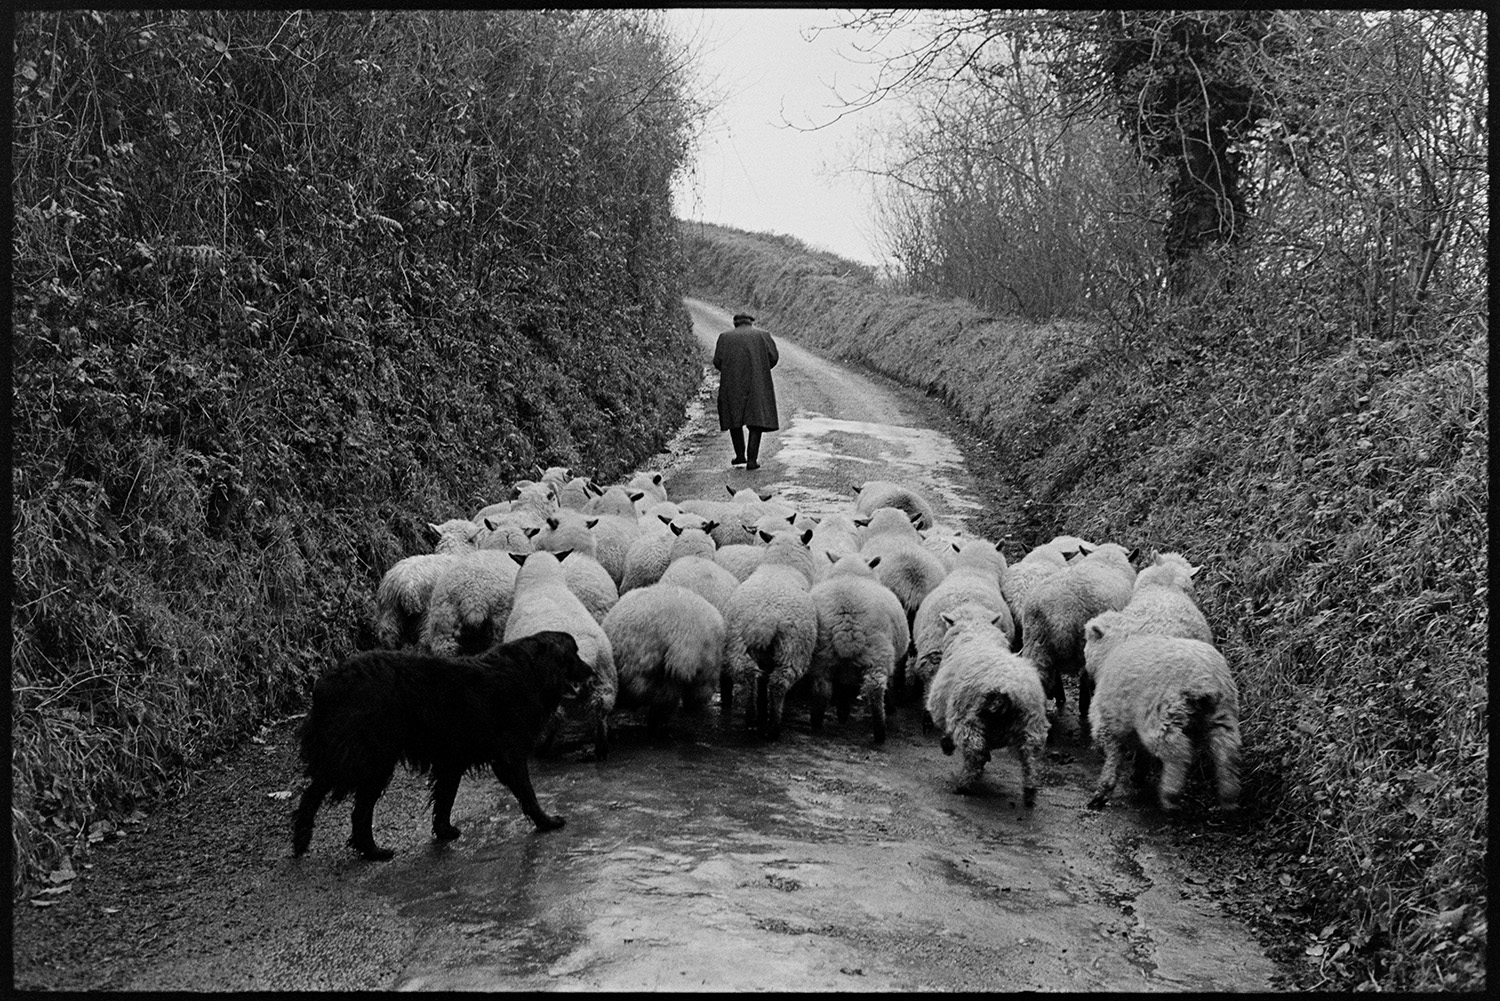 Farmers taking sheep to fields. 
[Ivor Brock leading a small flock of sheep down a lane at Millhams, Dolton. A dog is following the sheep.]